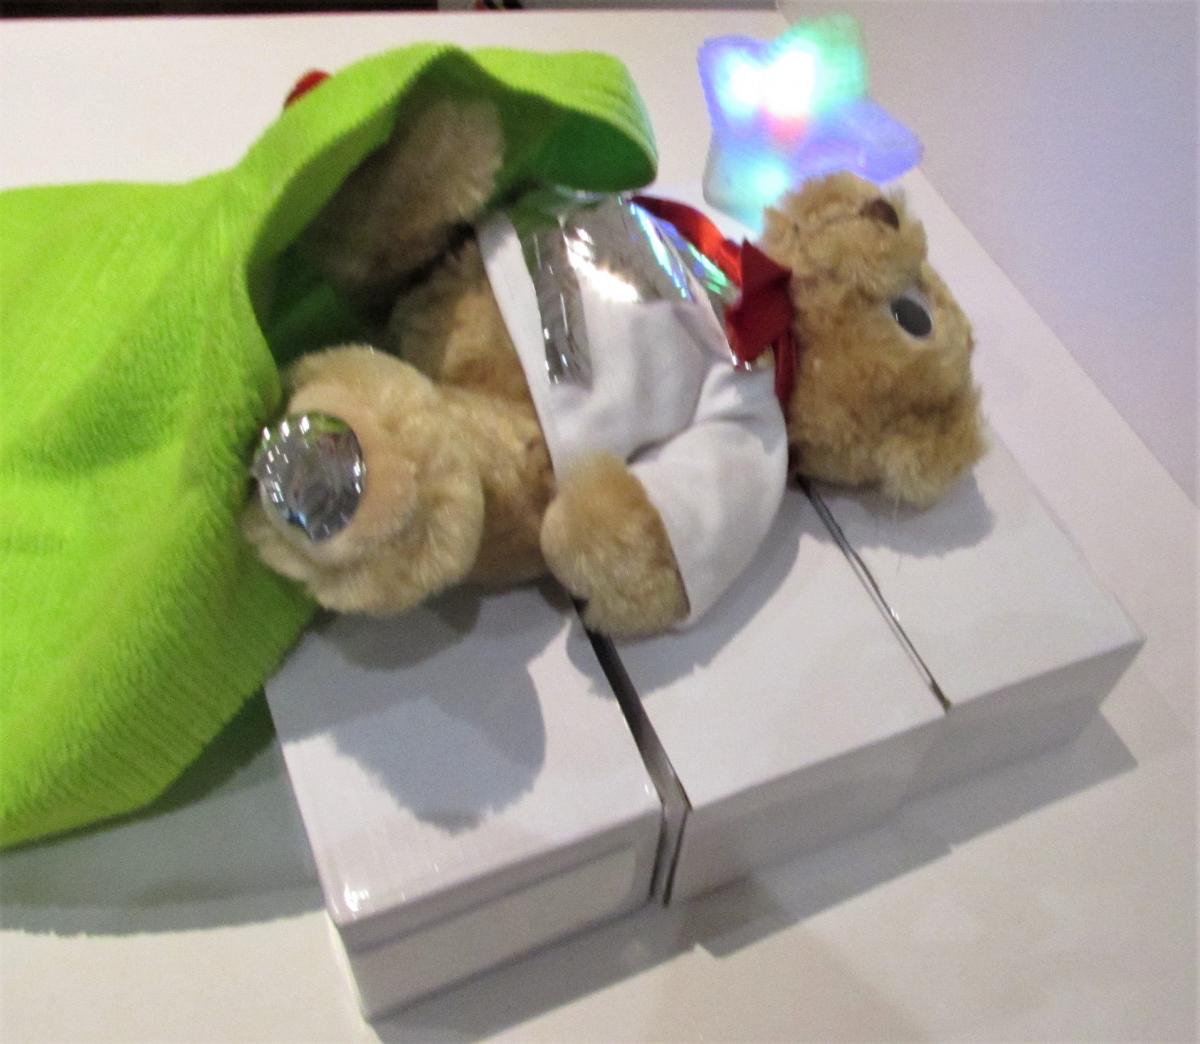 a stuffed toy bear on a bed made of cardboard boxes and a green blanket